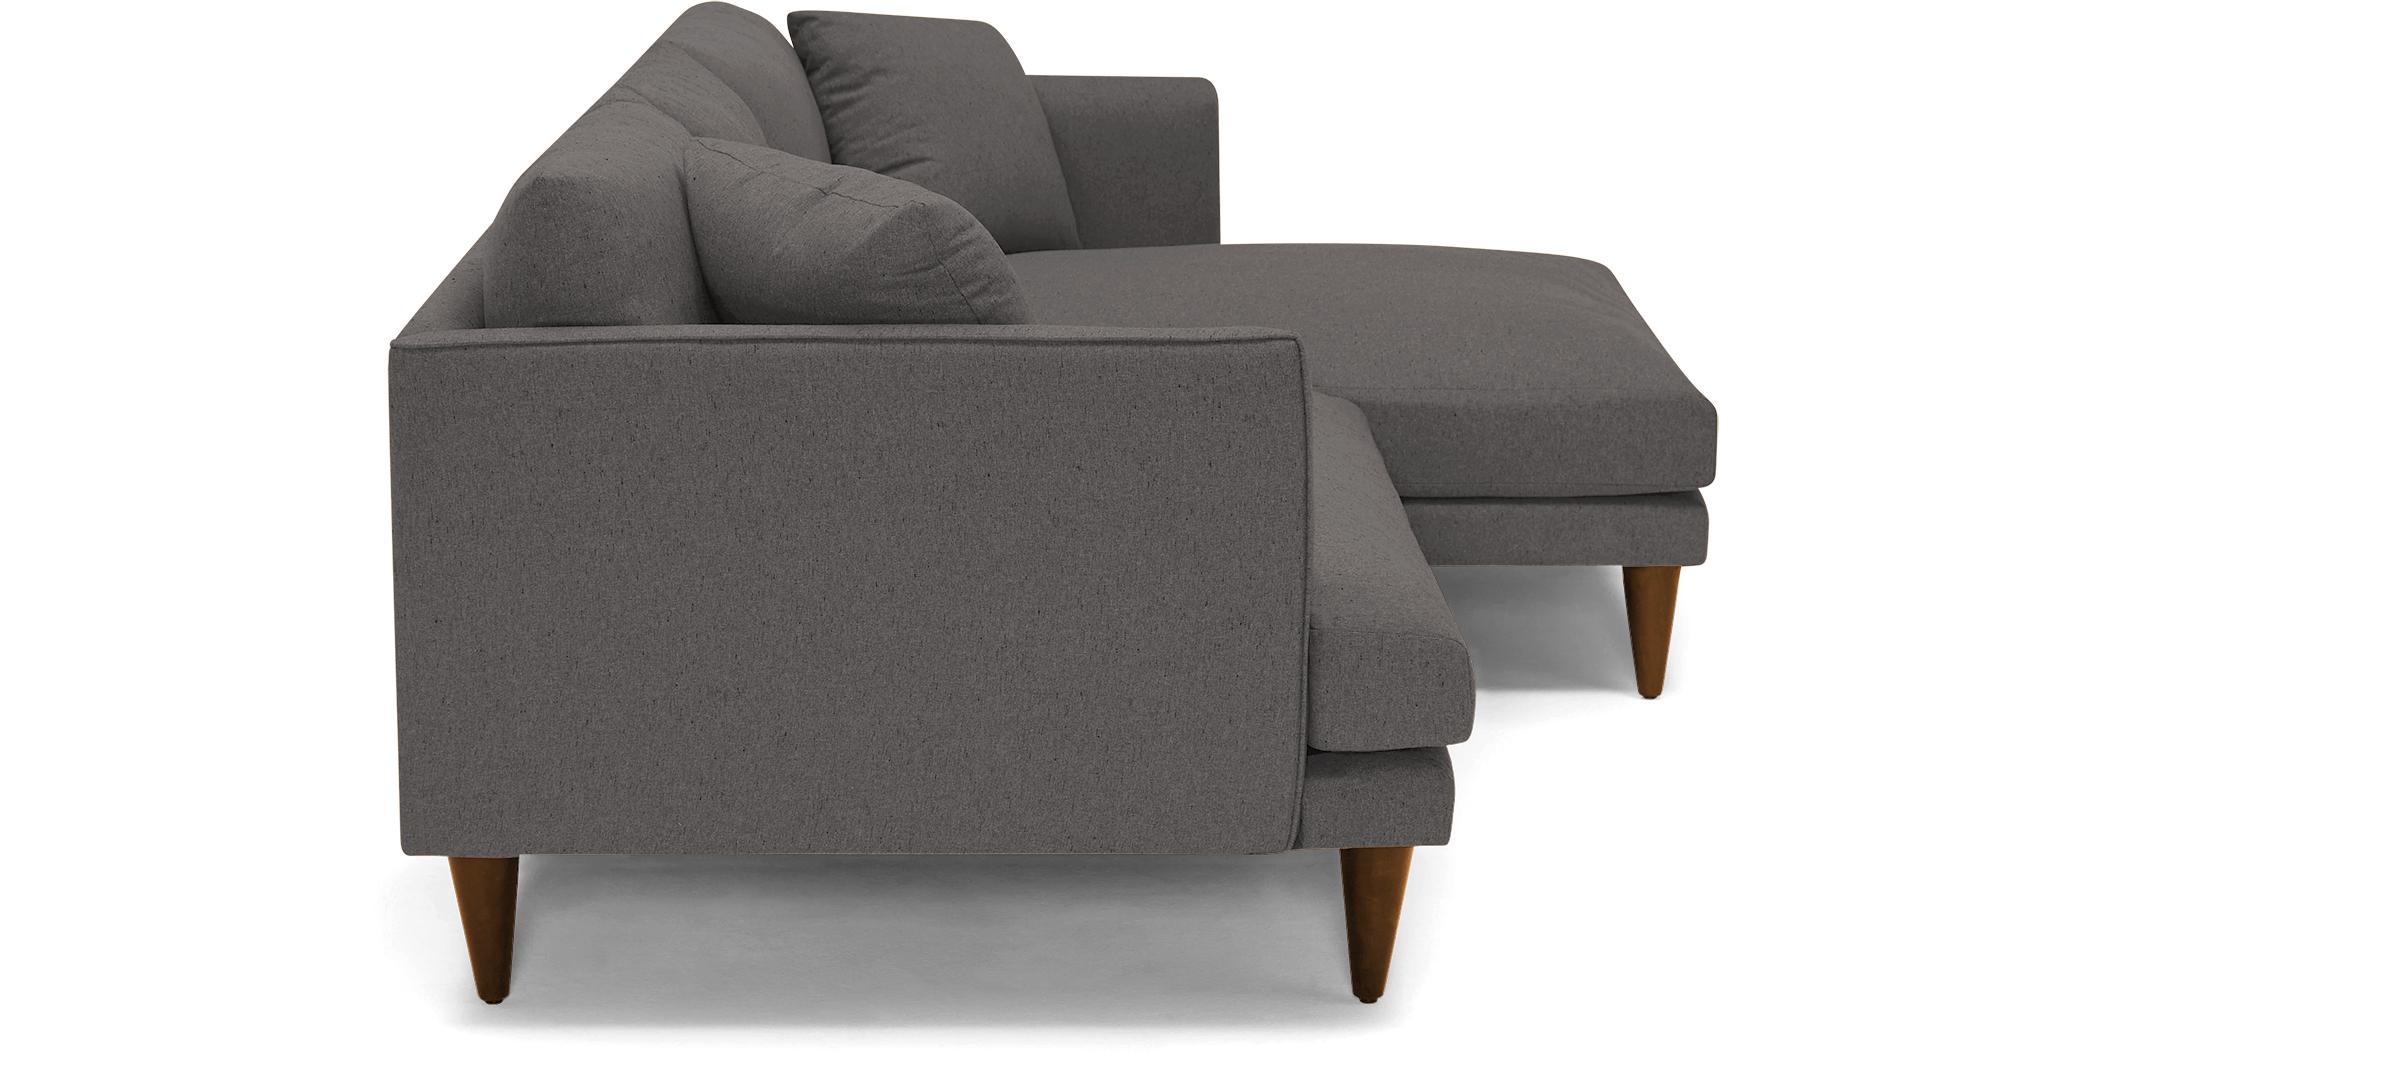 Gray Lewis Mid Century Modern Sectional - Cordova Eclipse - Mocha - Right - Cone - Image 2